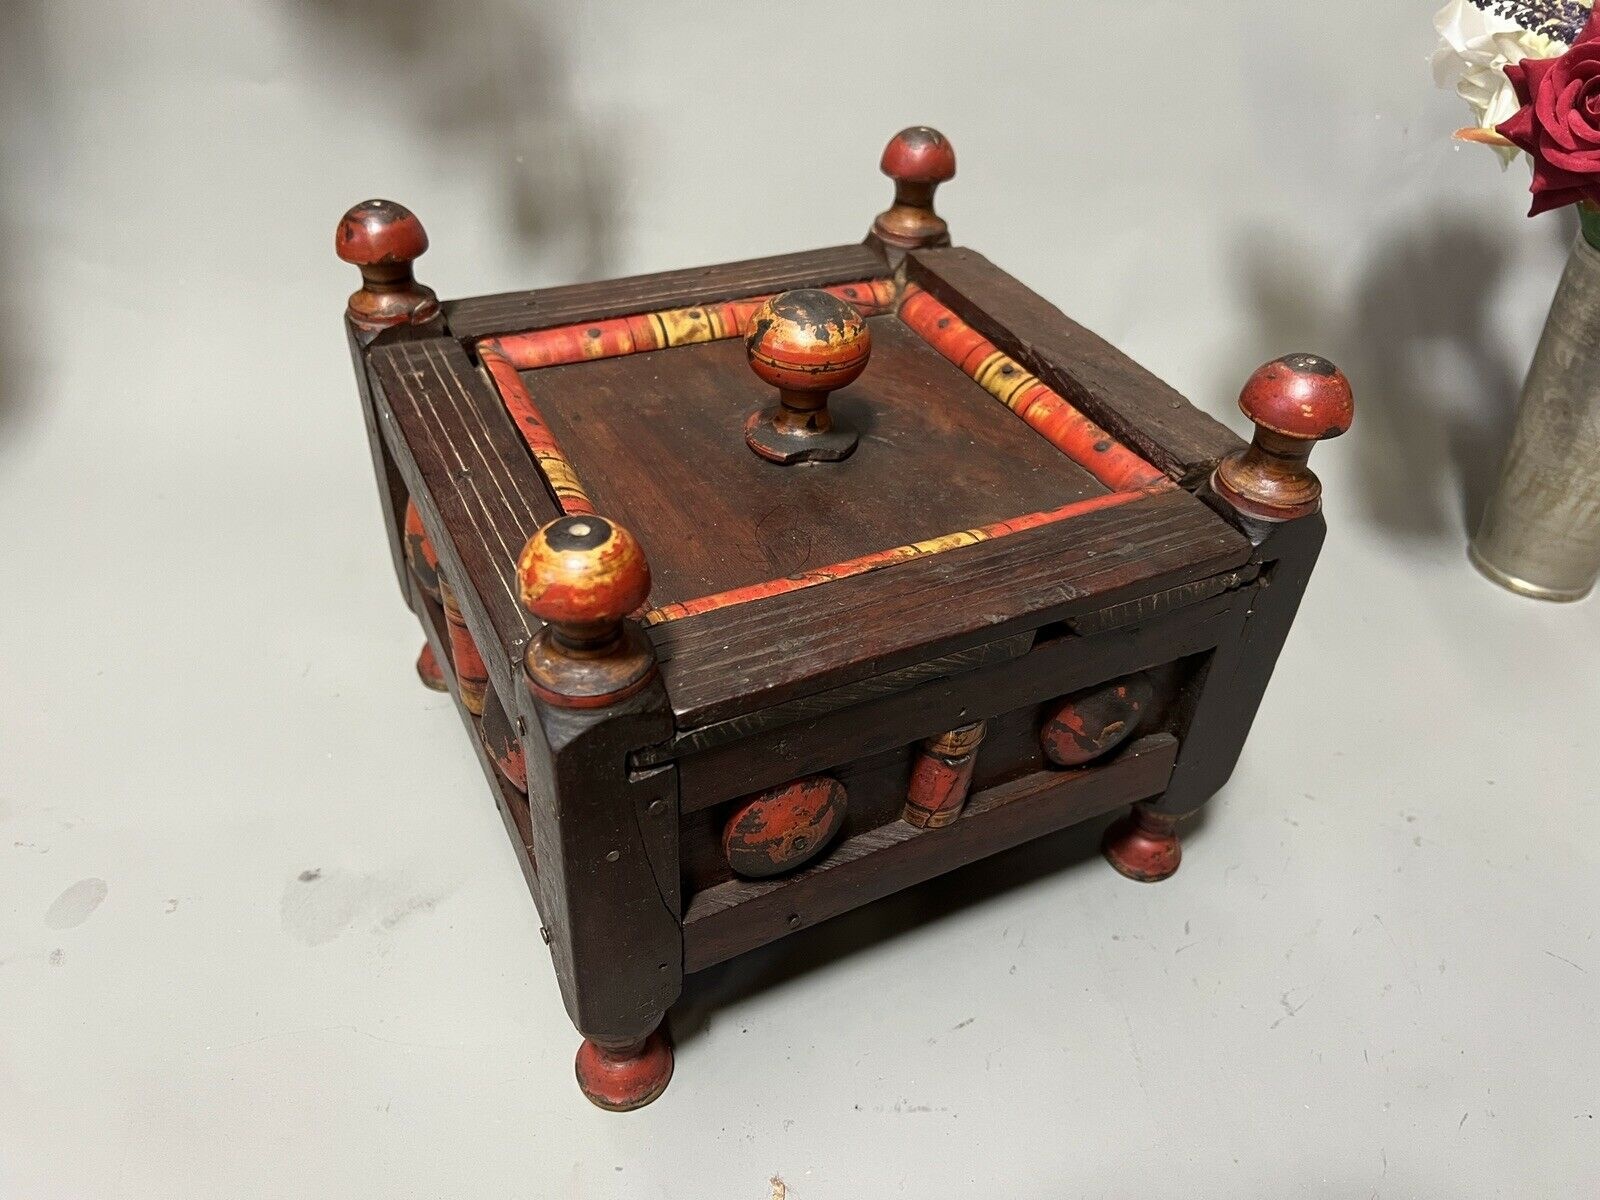 handpainted  wooden Lacquerware  Spice Box from Afghanistan / Pakistan No:B